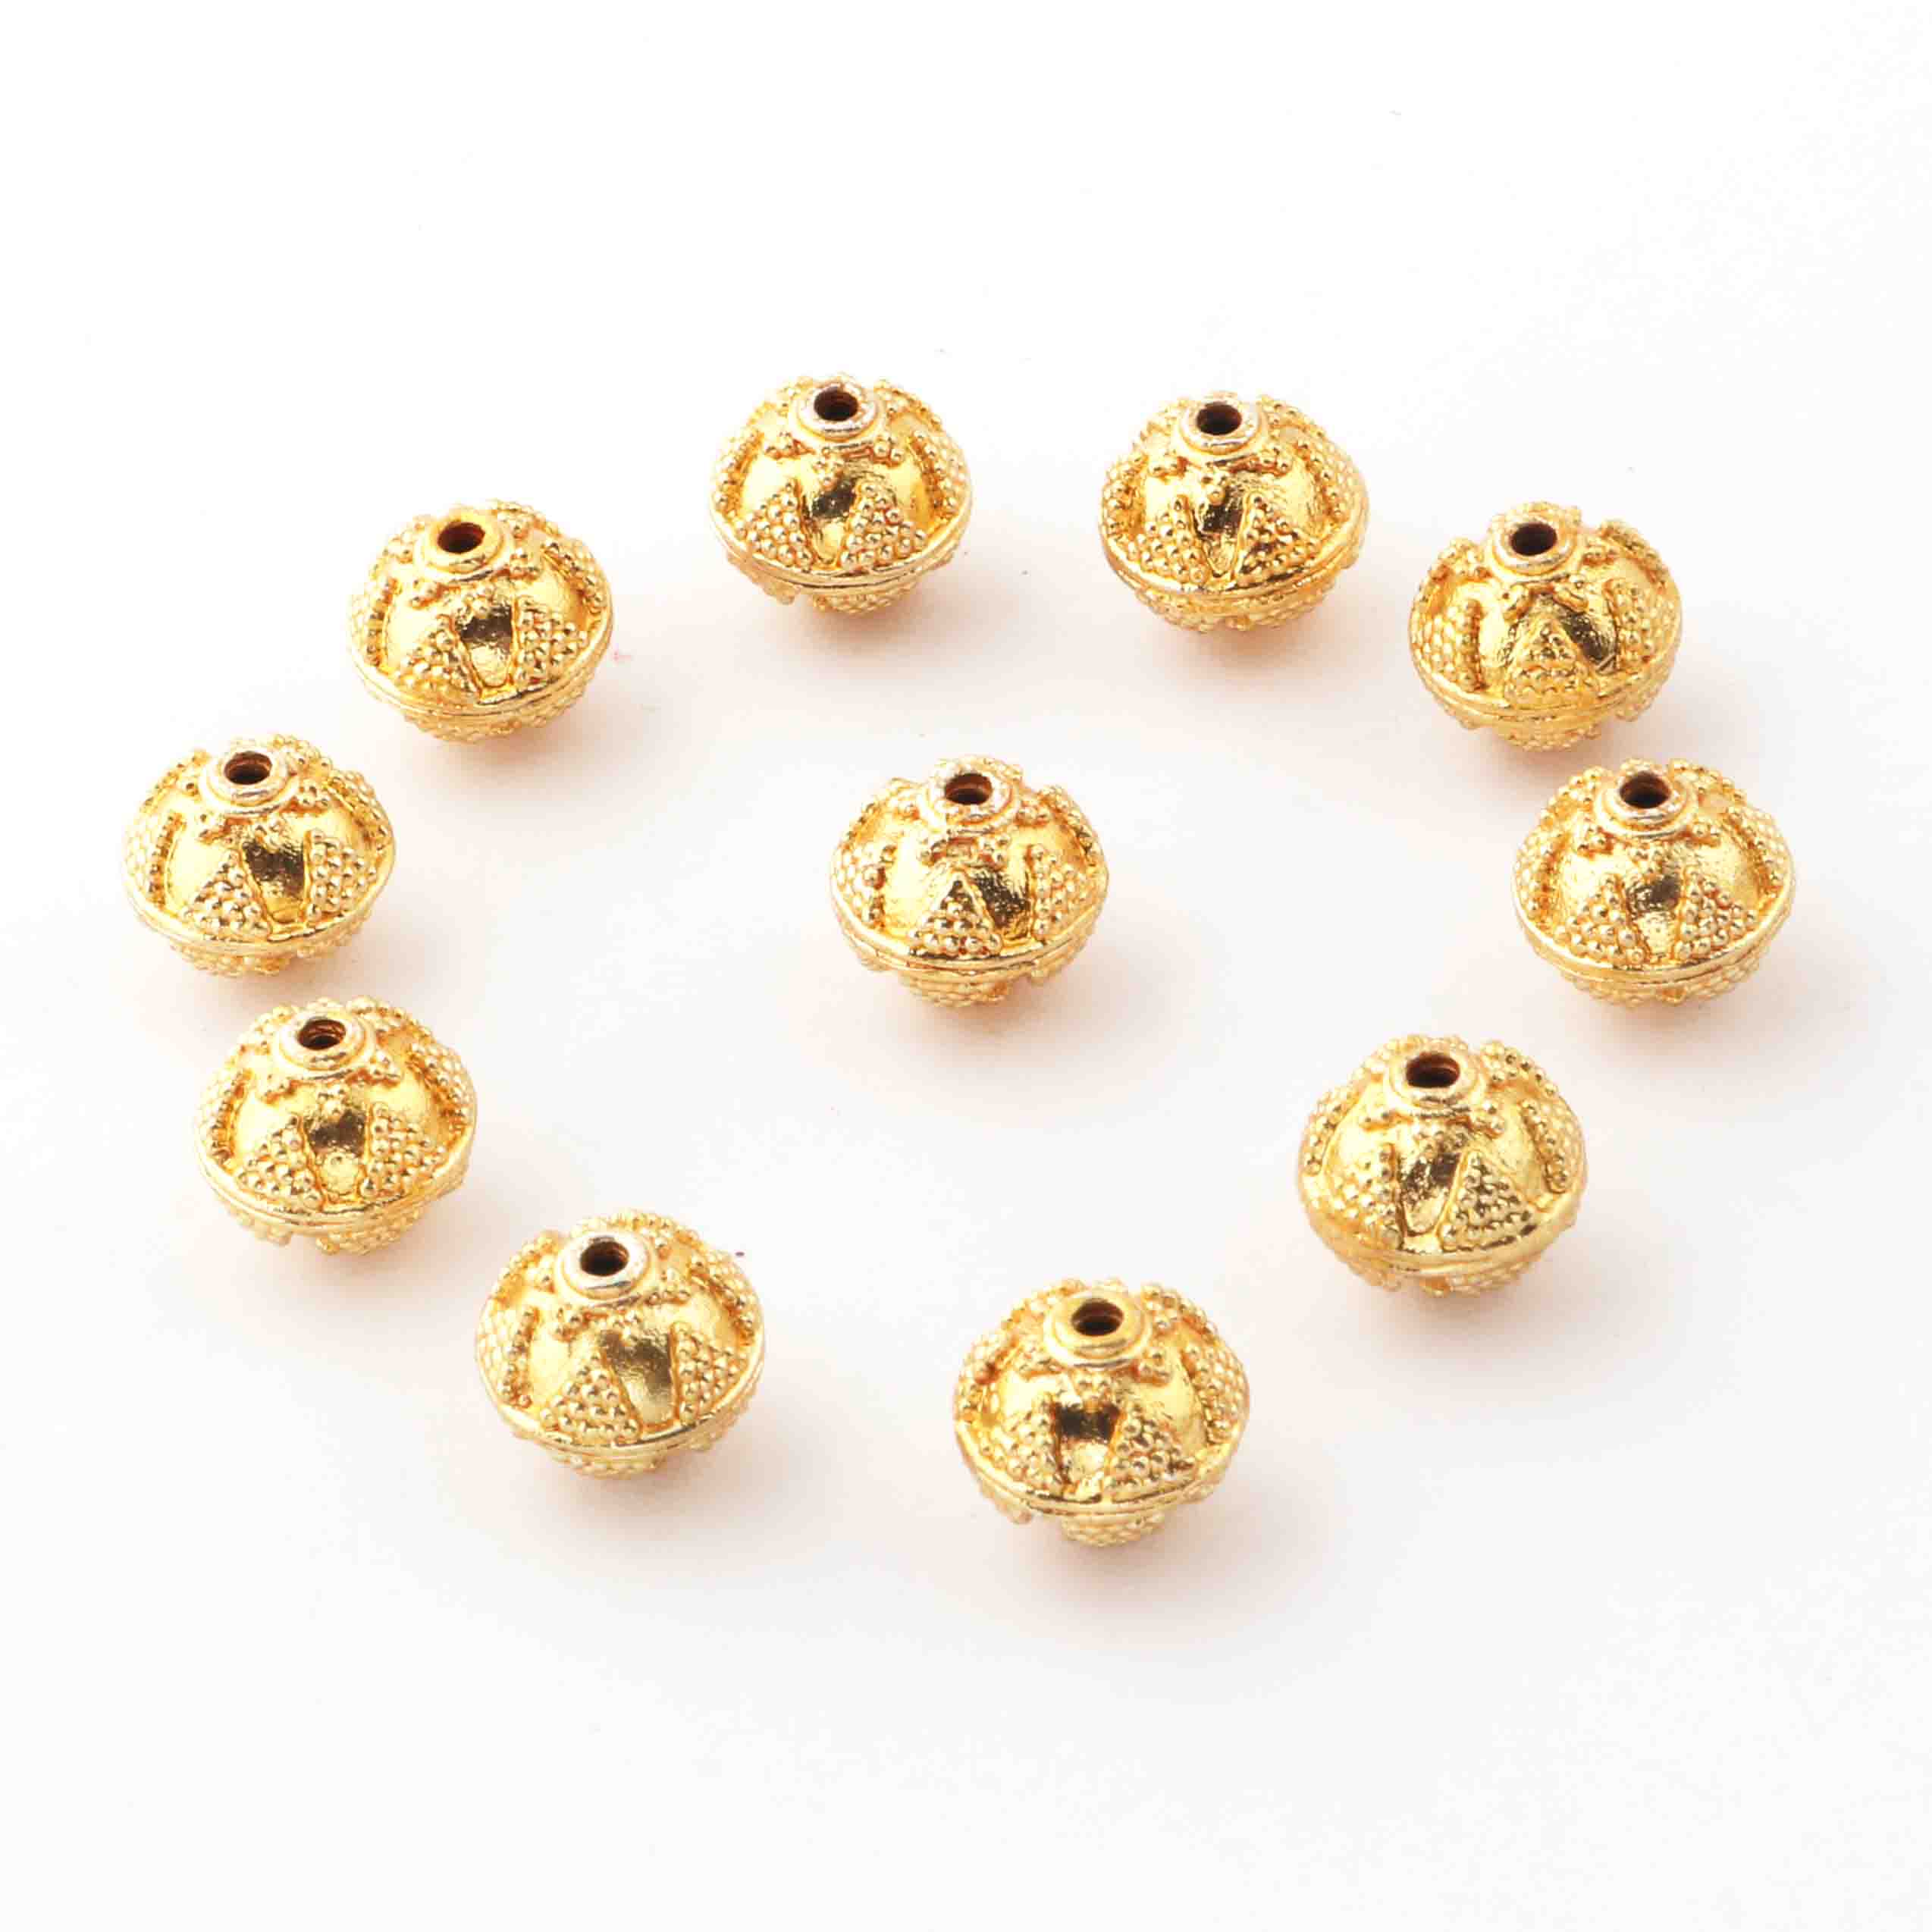 10mm 10pc Gold Saucer Beads, Brushed Spacer Beads for Jewelry Making, Gold  Plated Beads Findings, Jewelry Supplies 